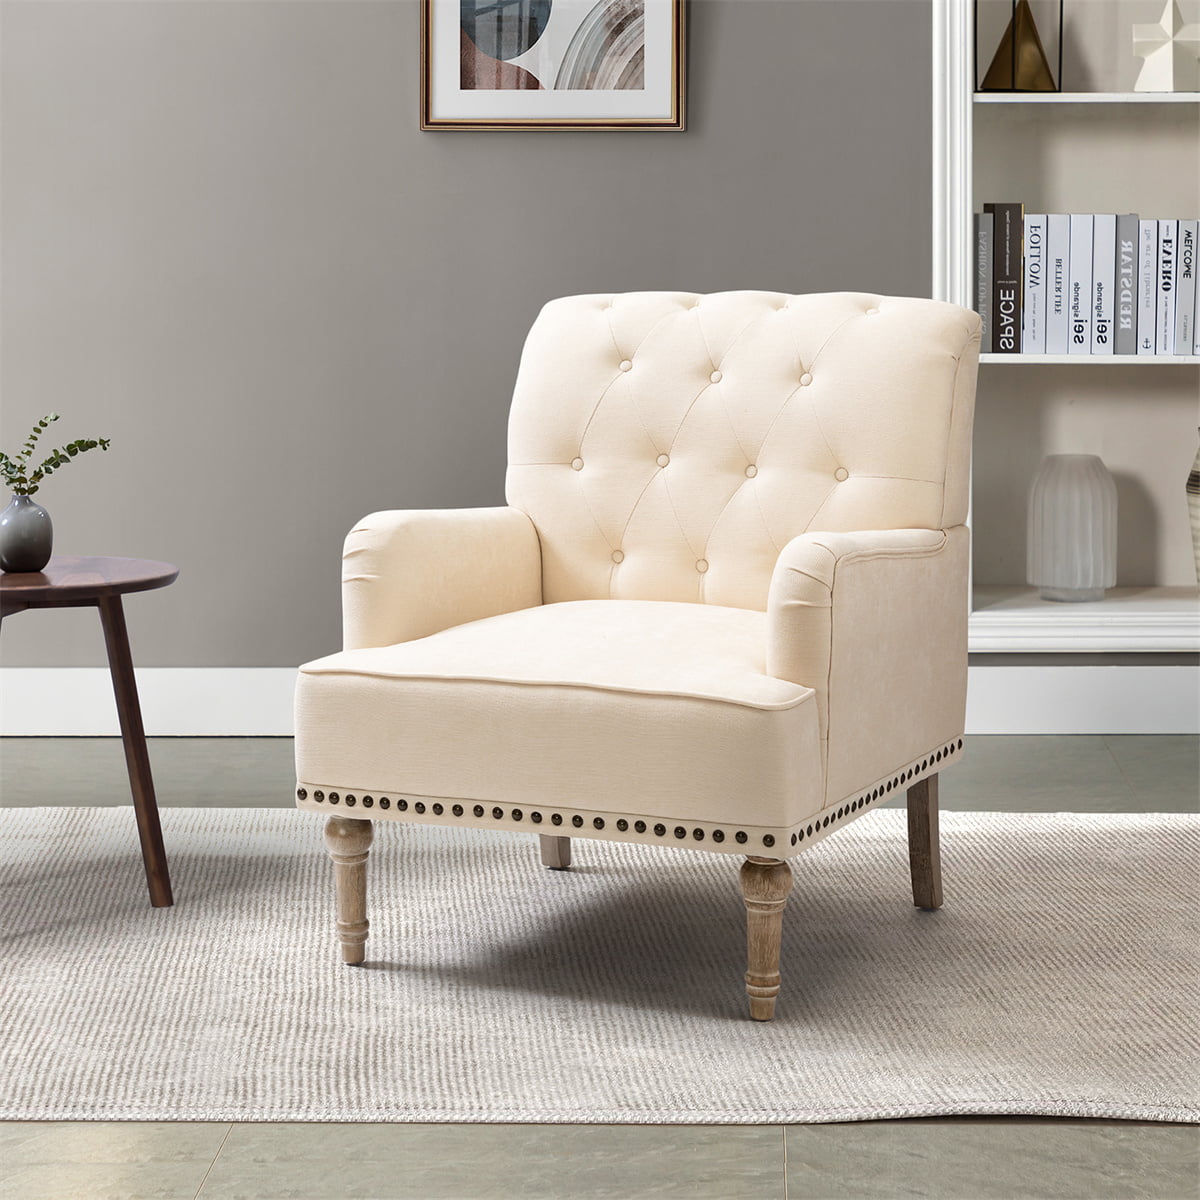 INCLAKE Living Room Accent Chair, Upholstered Armchair with Carved Legs ...